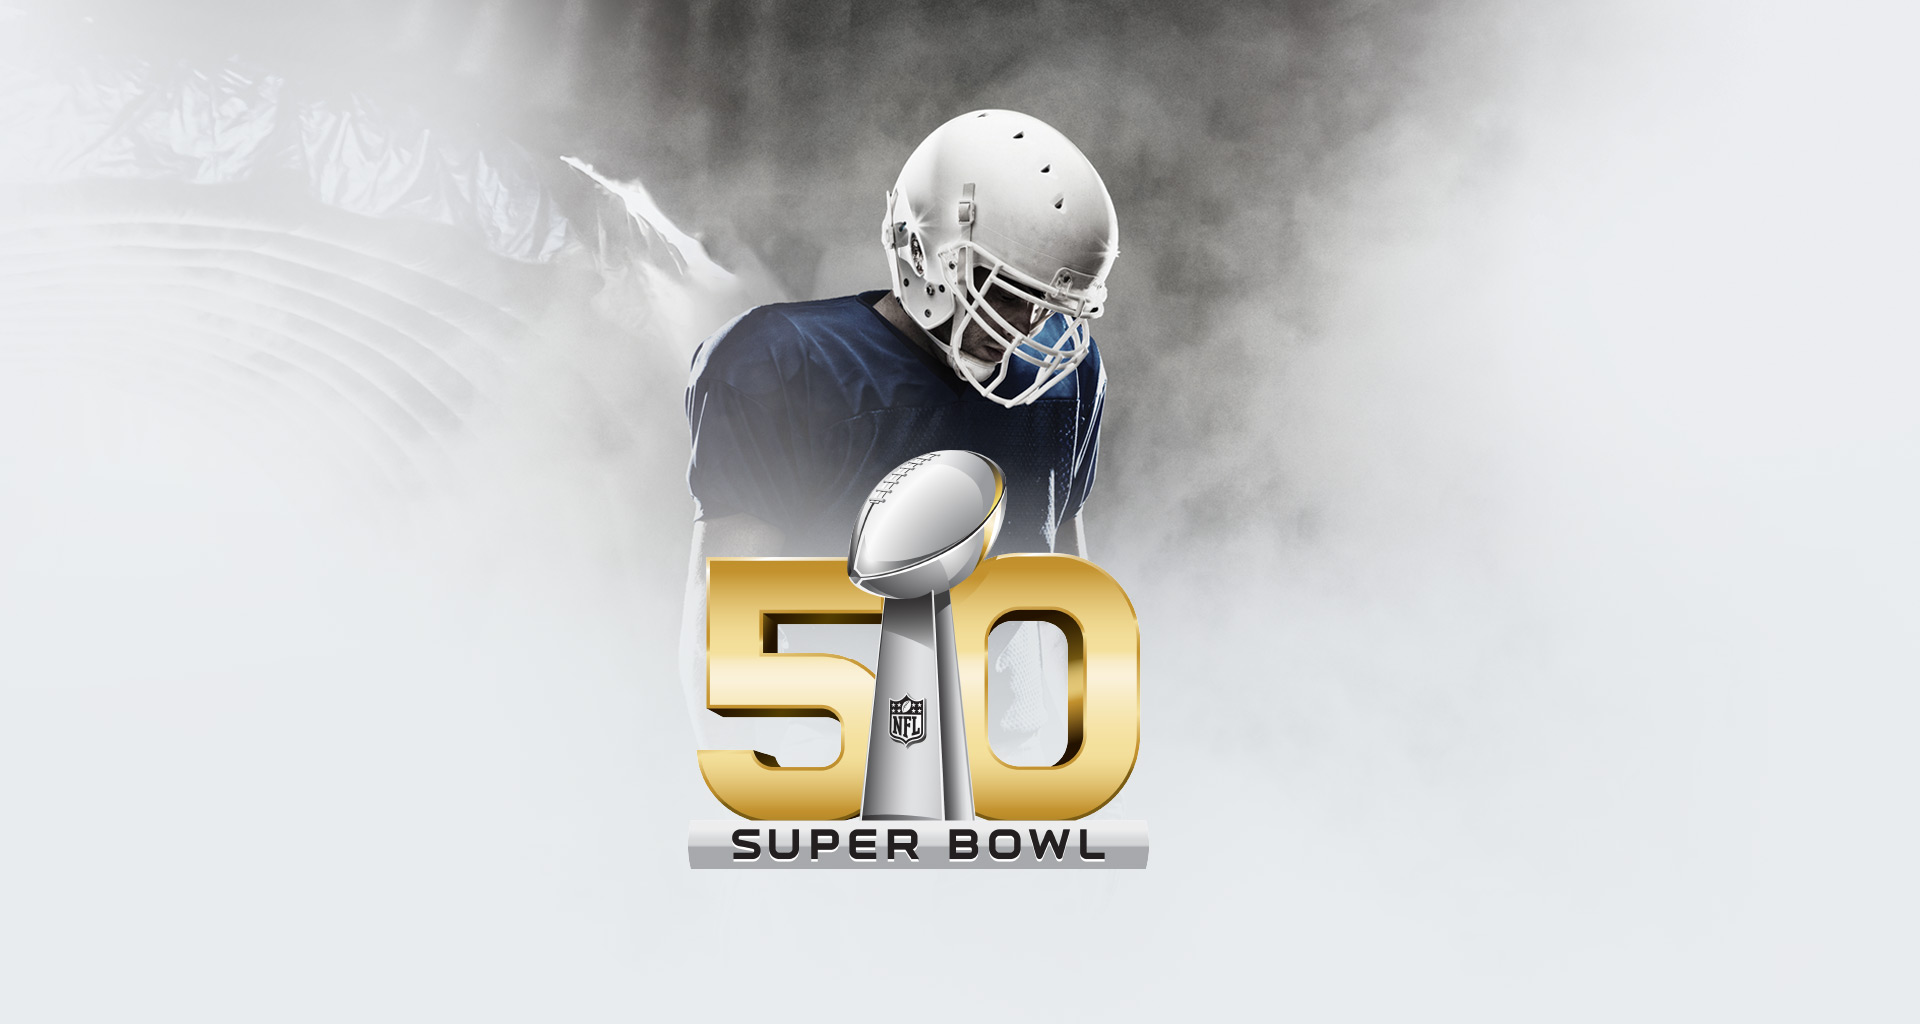 Super Bowl 50 Aspers at The Gate Newcastle The Best UK Casinos